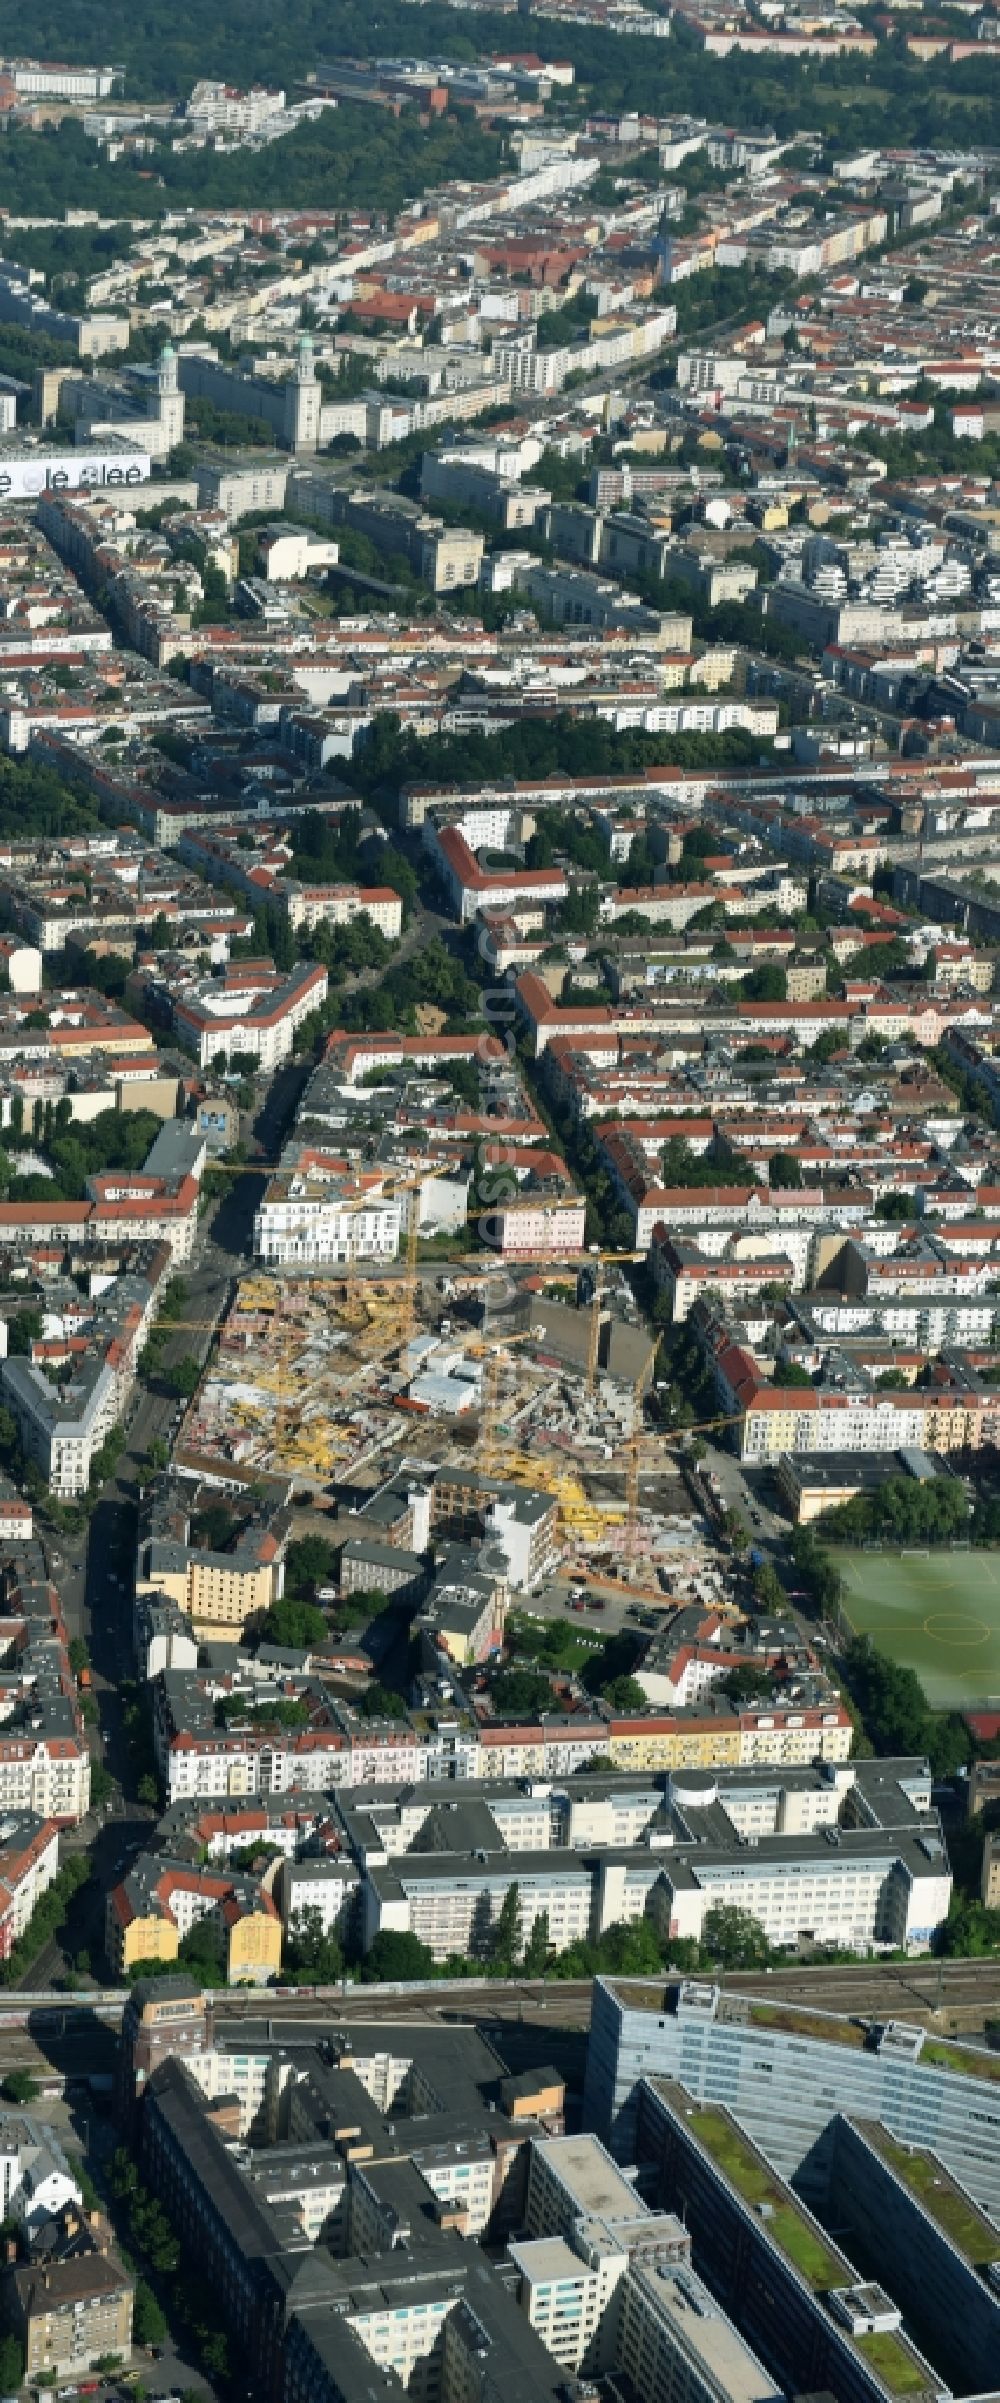 Berlin from the bird's eye view: Site Freudenberg complex in the residential area of the Boxhagener Strasse in Berlin Friedrichshain